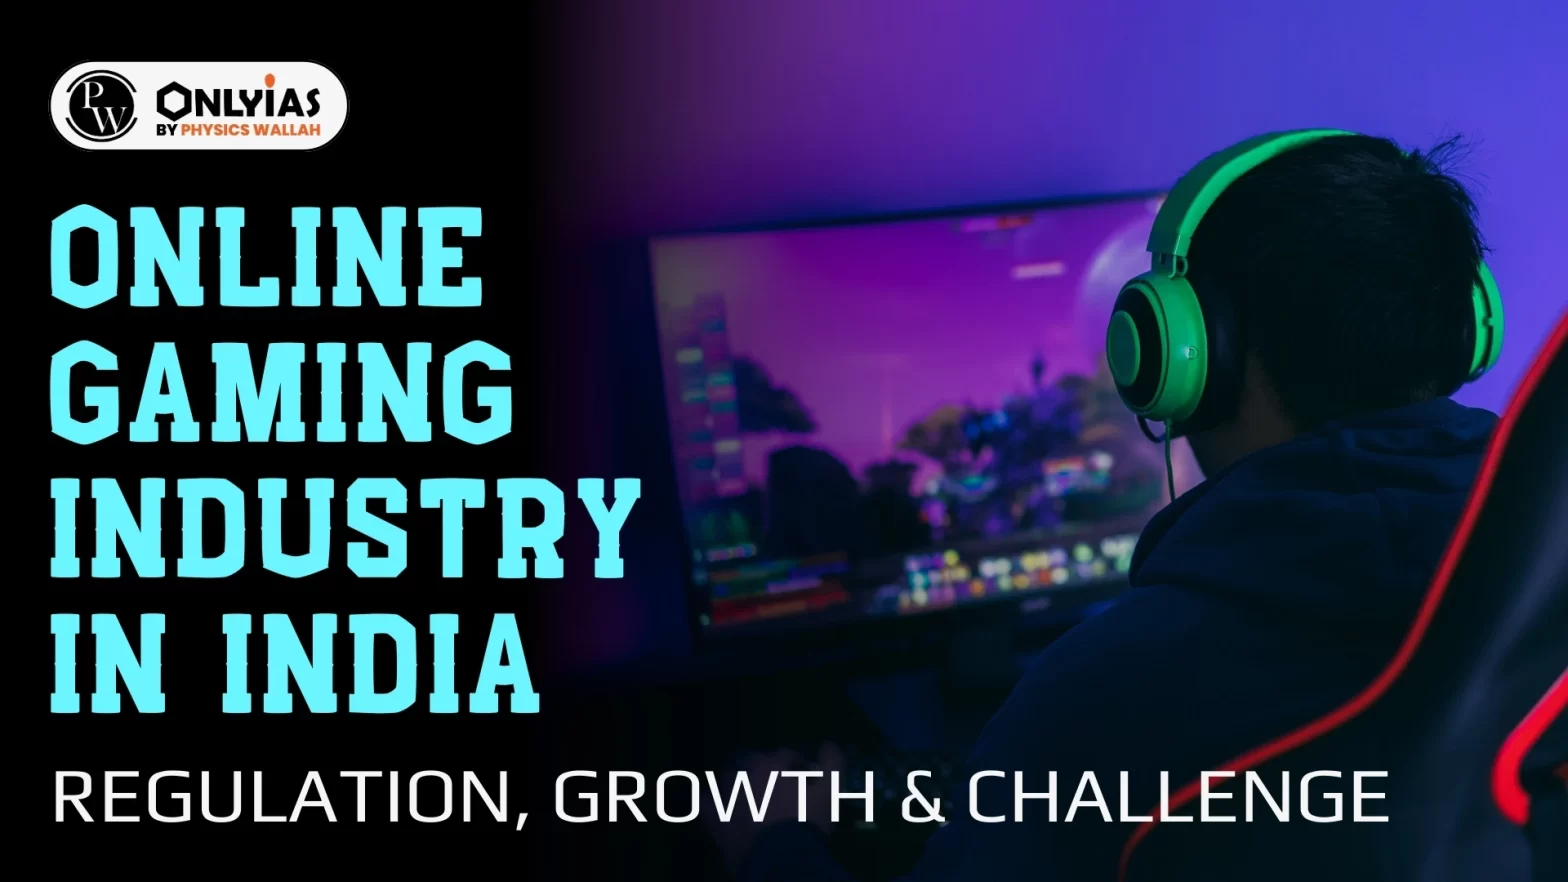 Online Gaming Industry in India: Regulation, Growth & Challenge